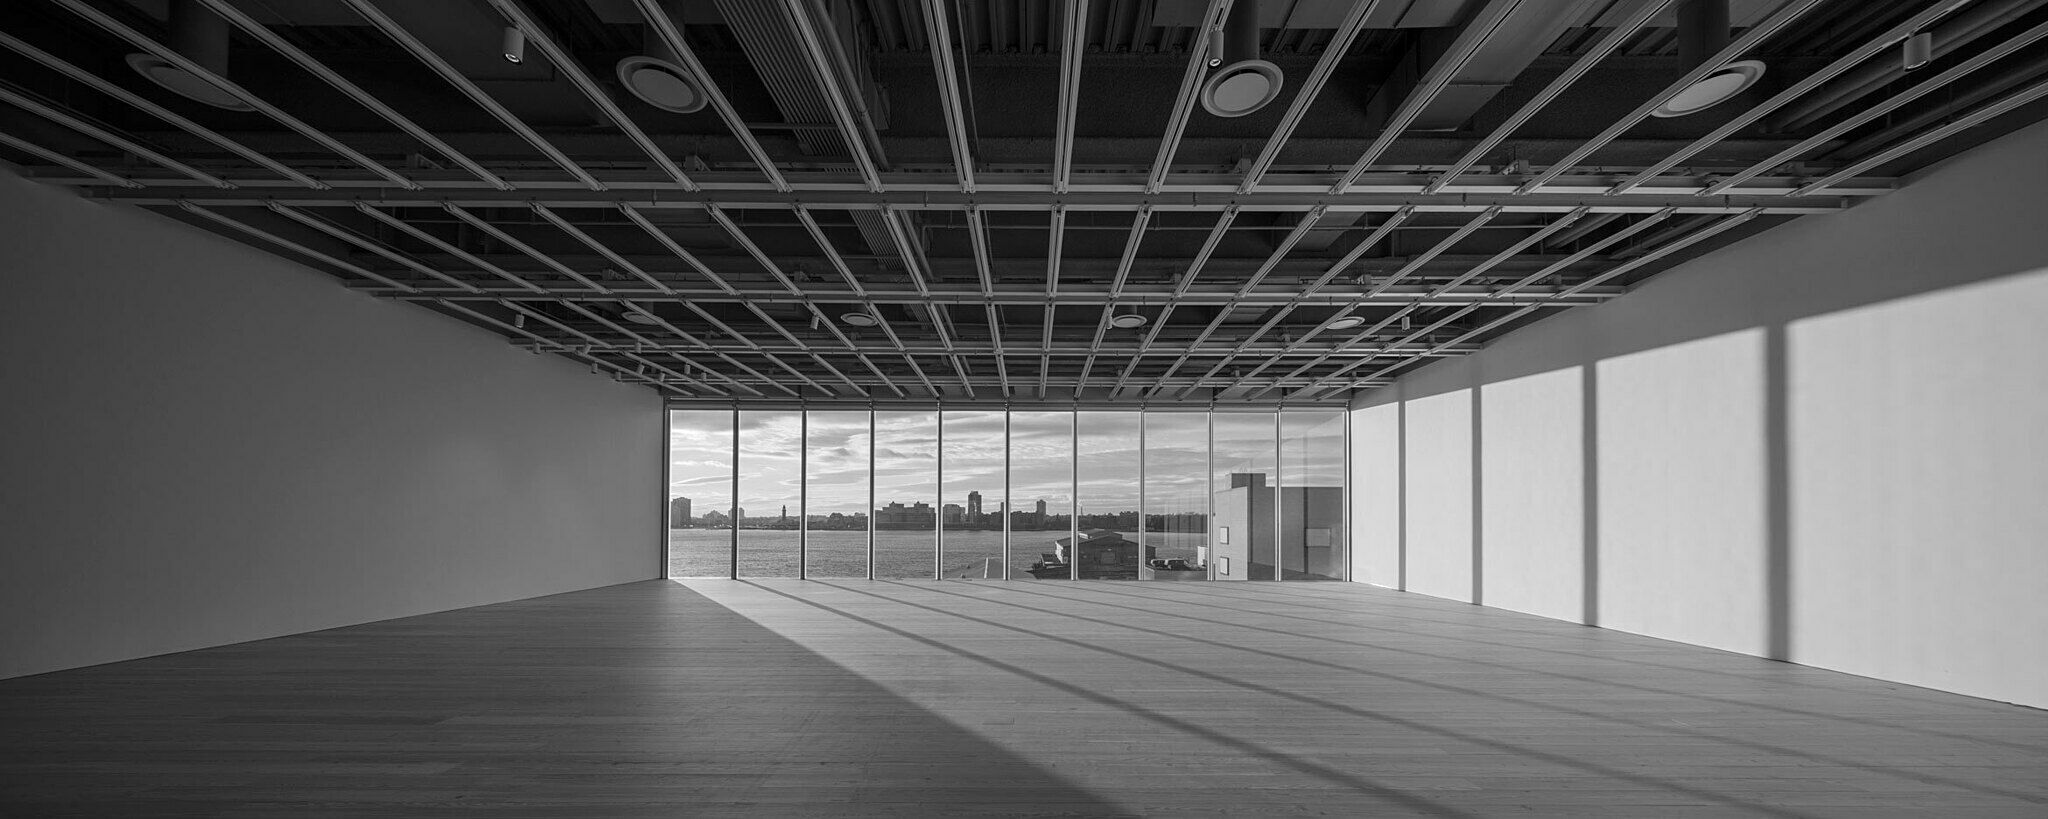 A view of the empty fifth floor Whitney galleries in black and white.